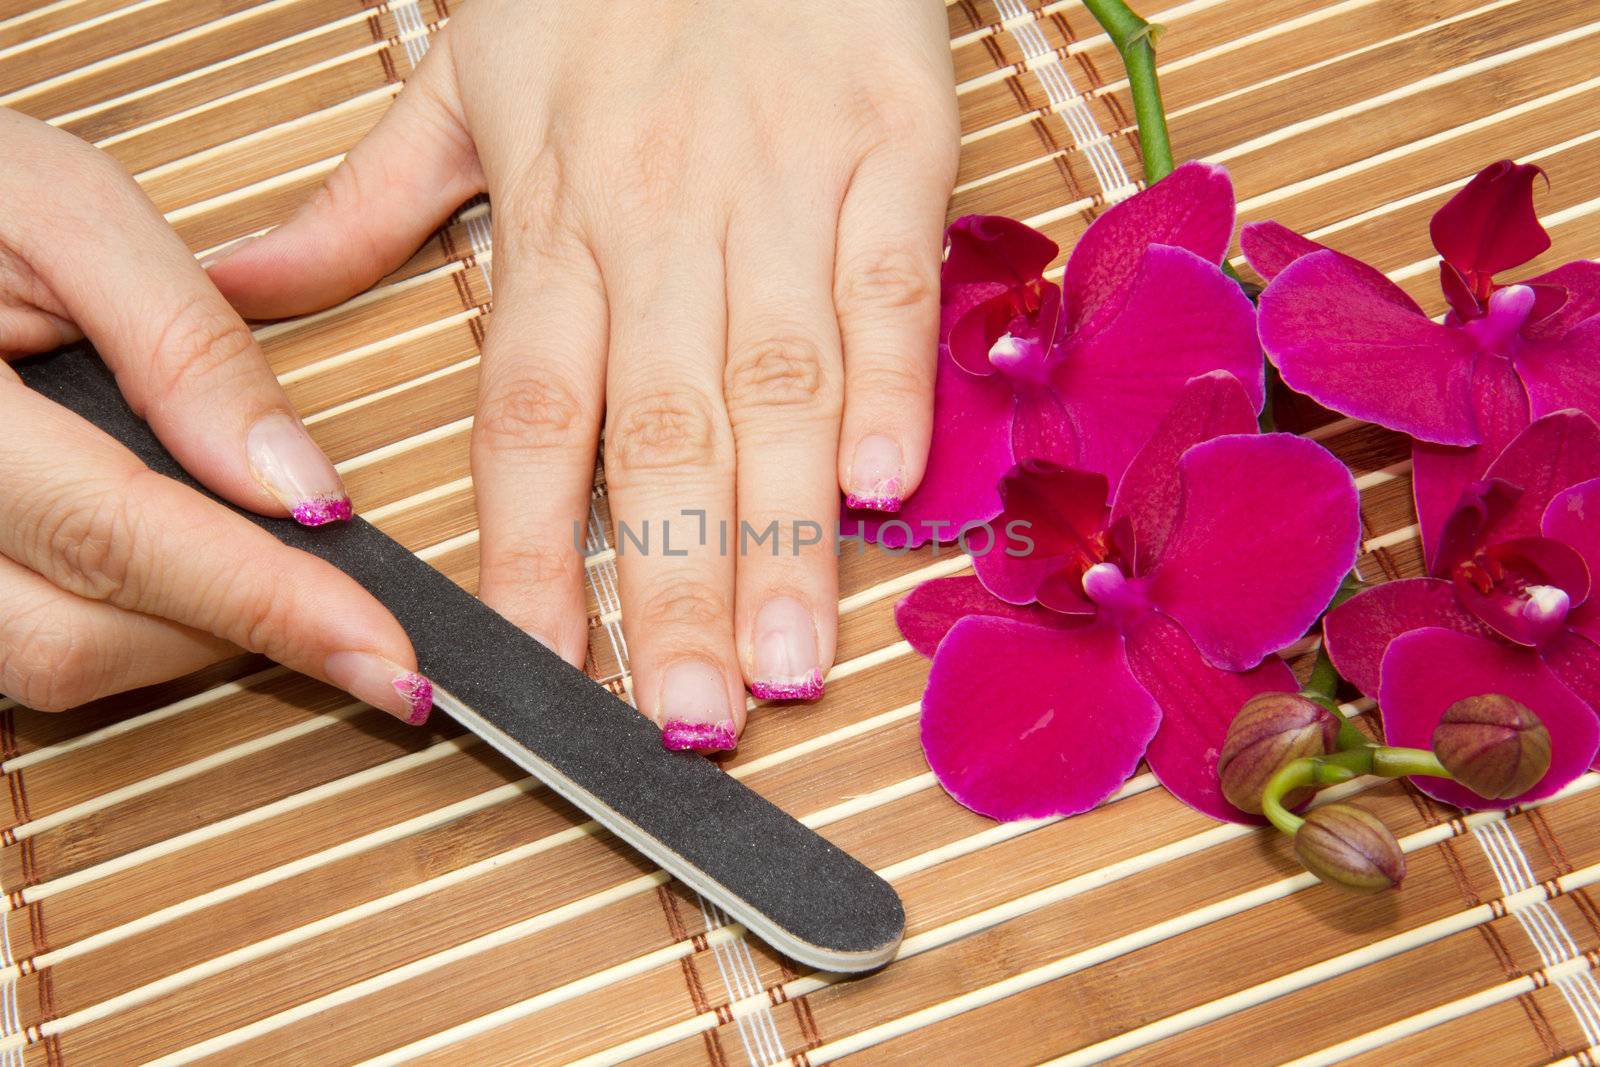 Beautiful hands with pink manicure holding purple orchid 